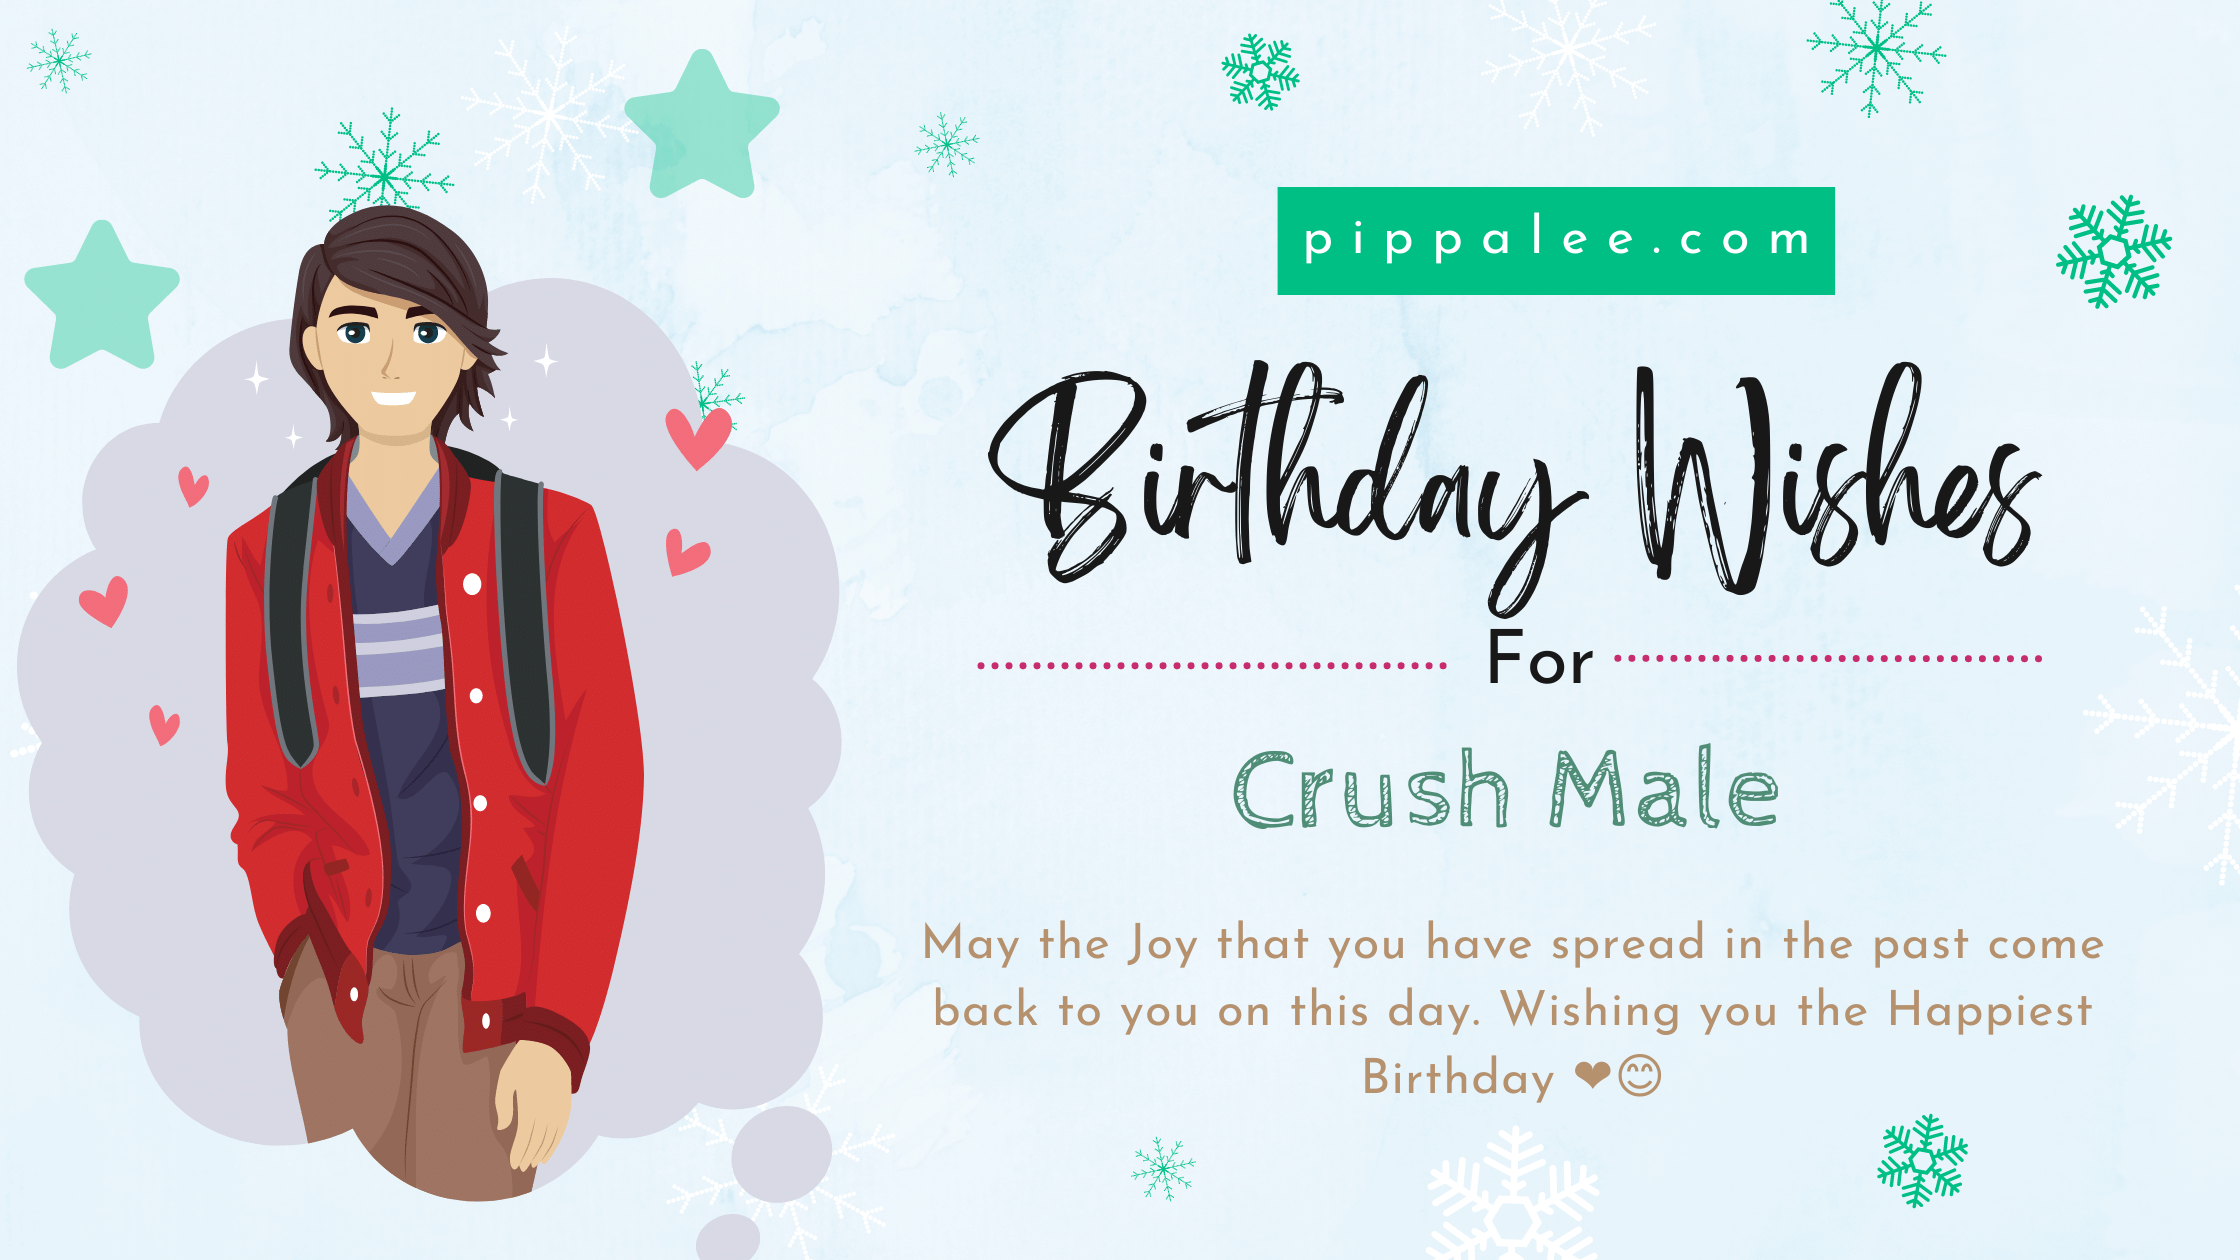  Birthday Wishes for Crush Male - Wishes & Messages